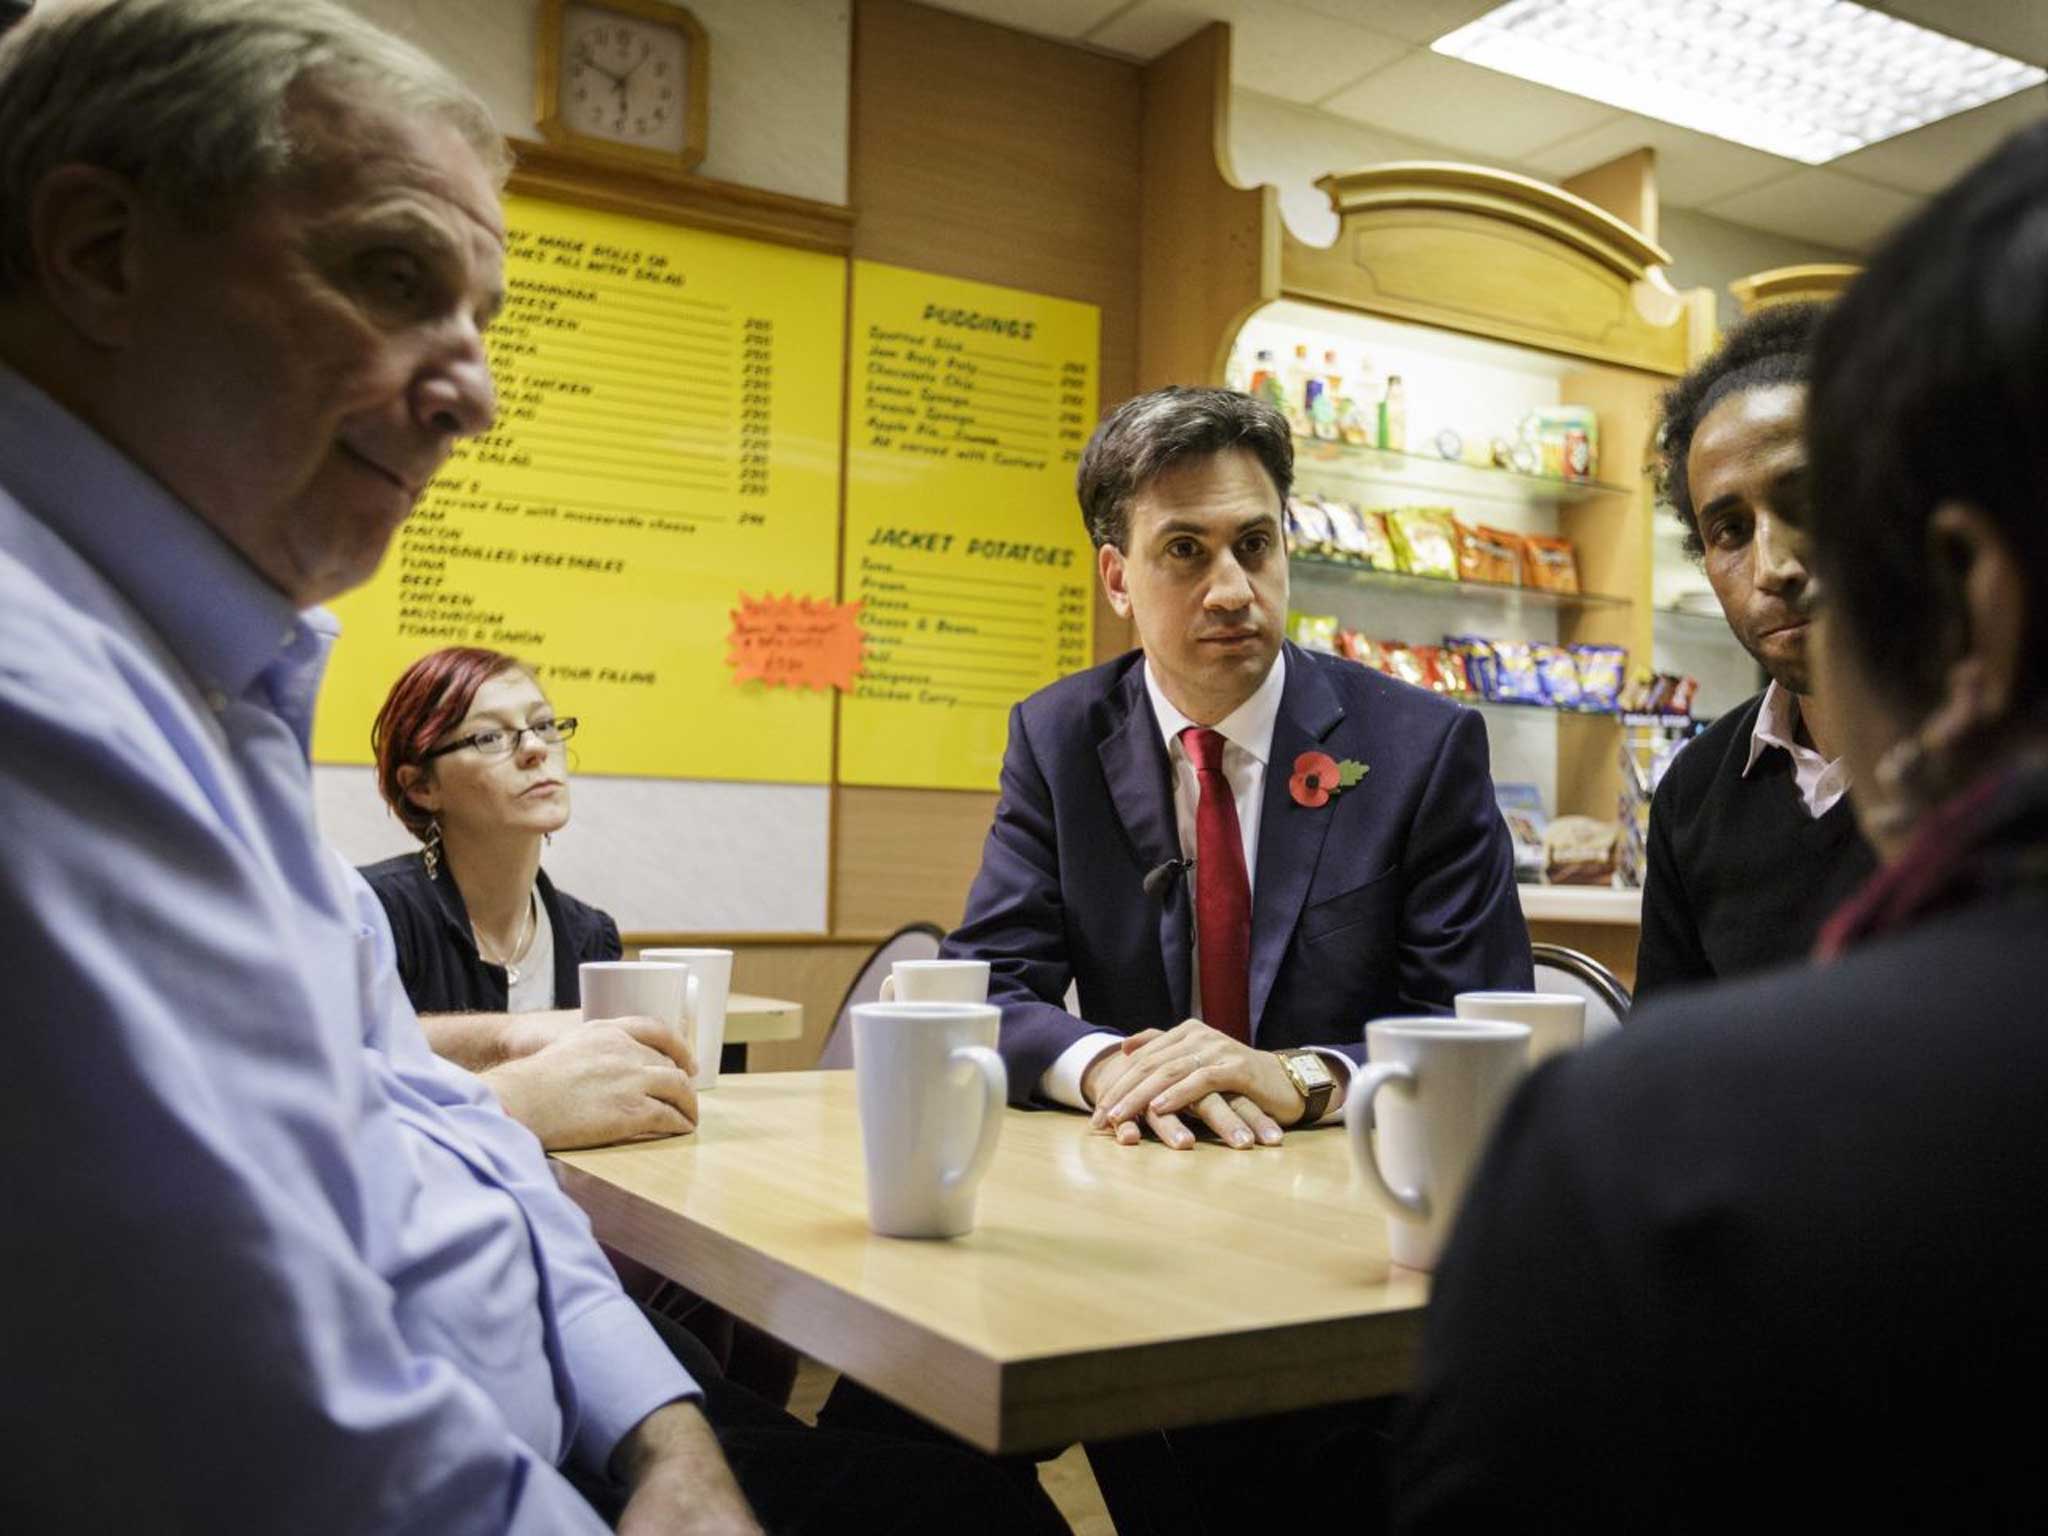 Shop talk: Ed Miliband discusses the living wage in a Bristol café